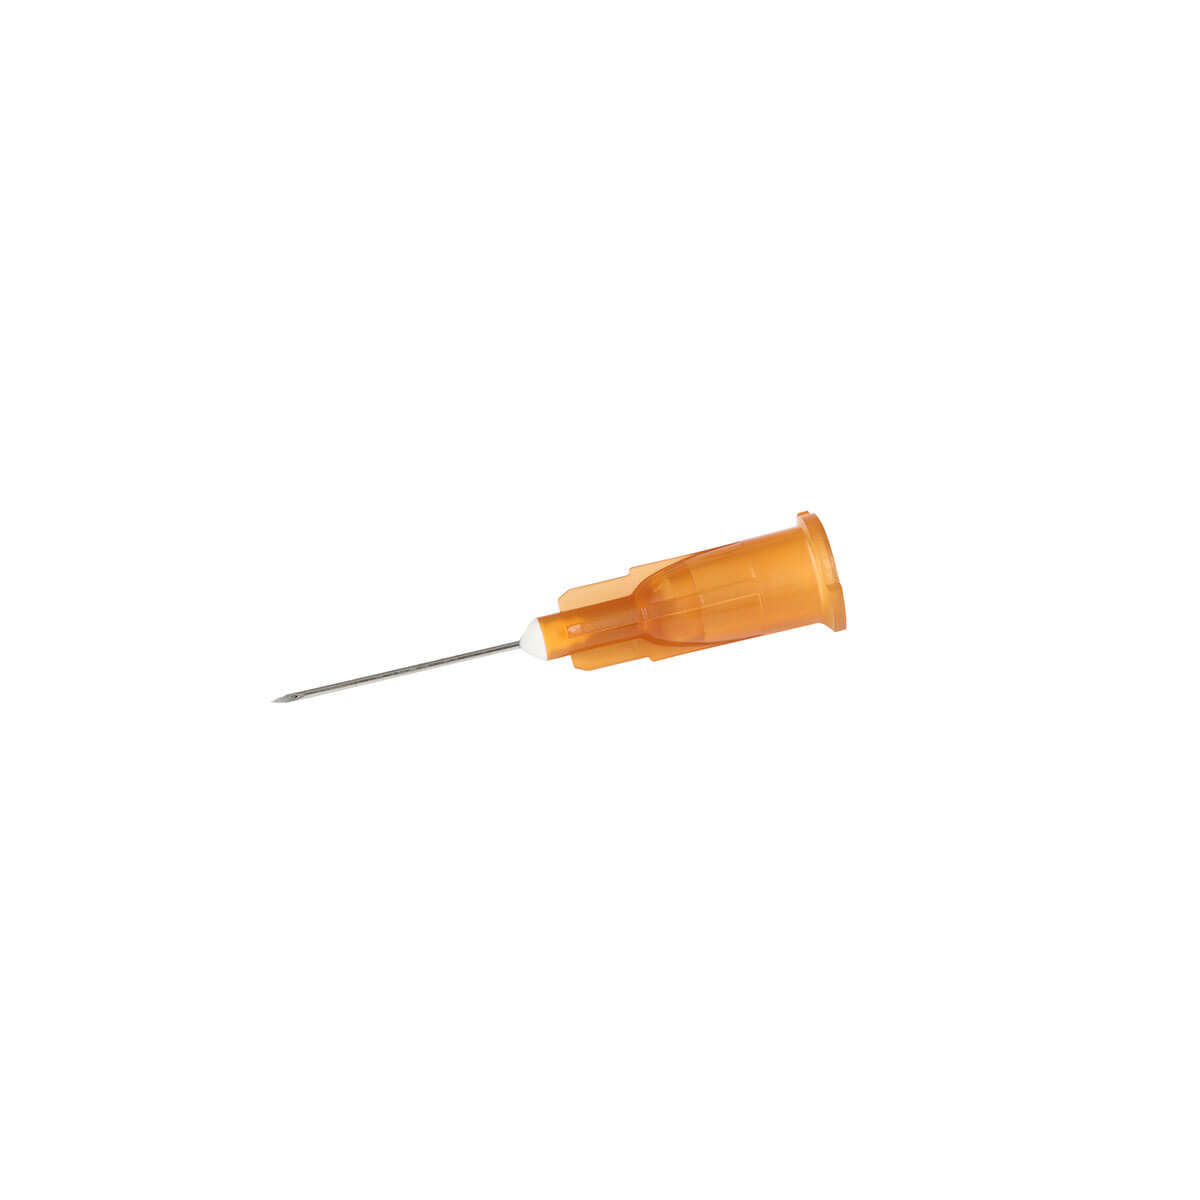 Neopoint Needle Brown 26G 16MM